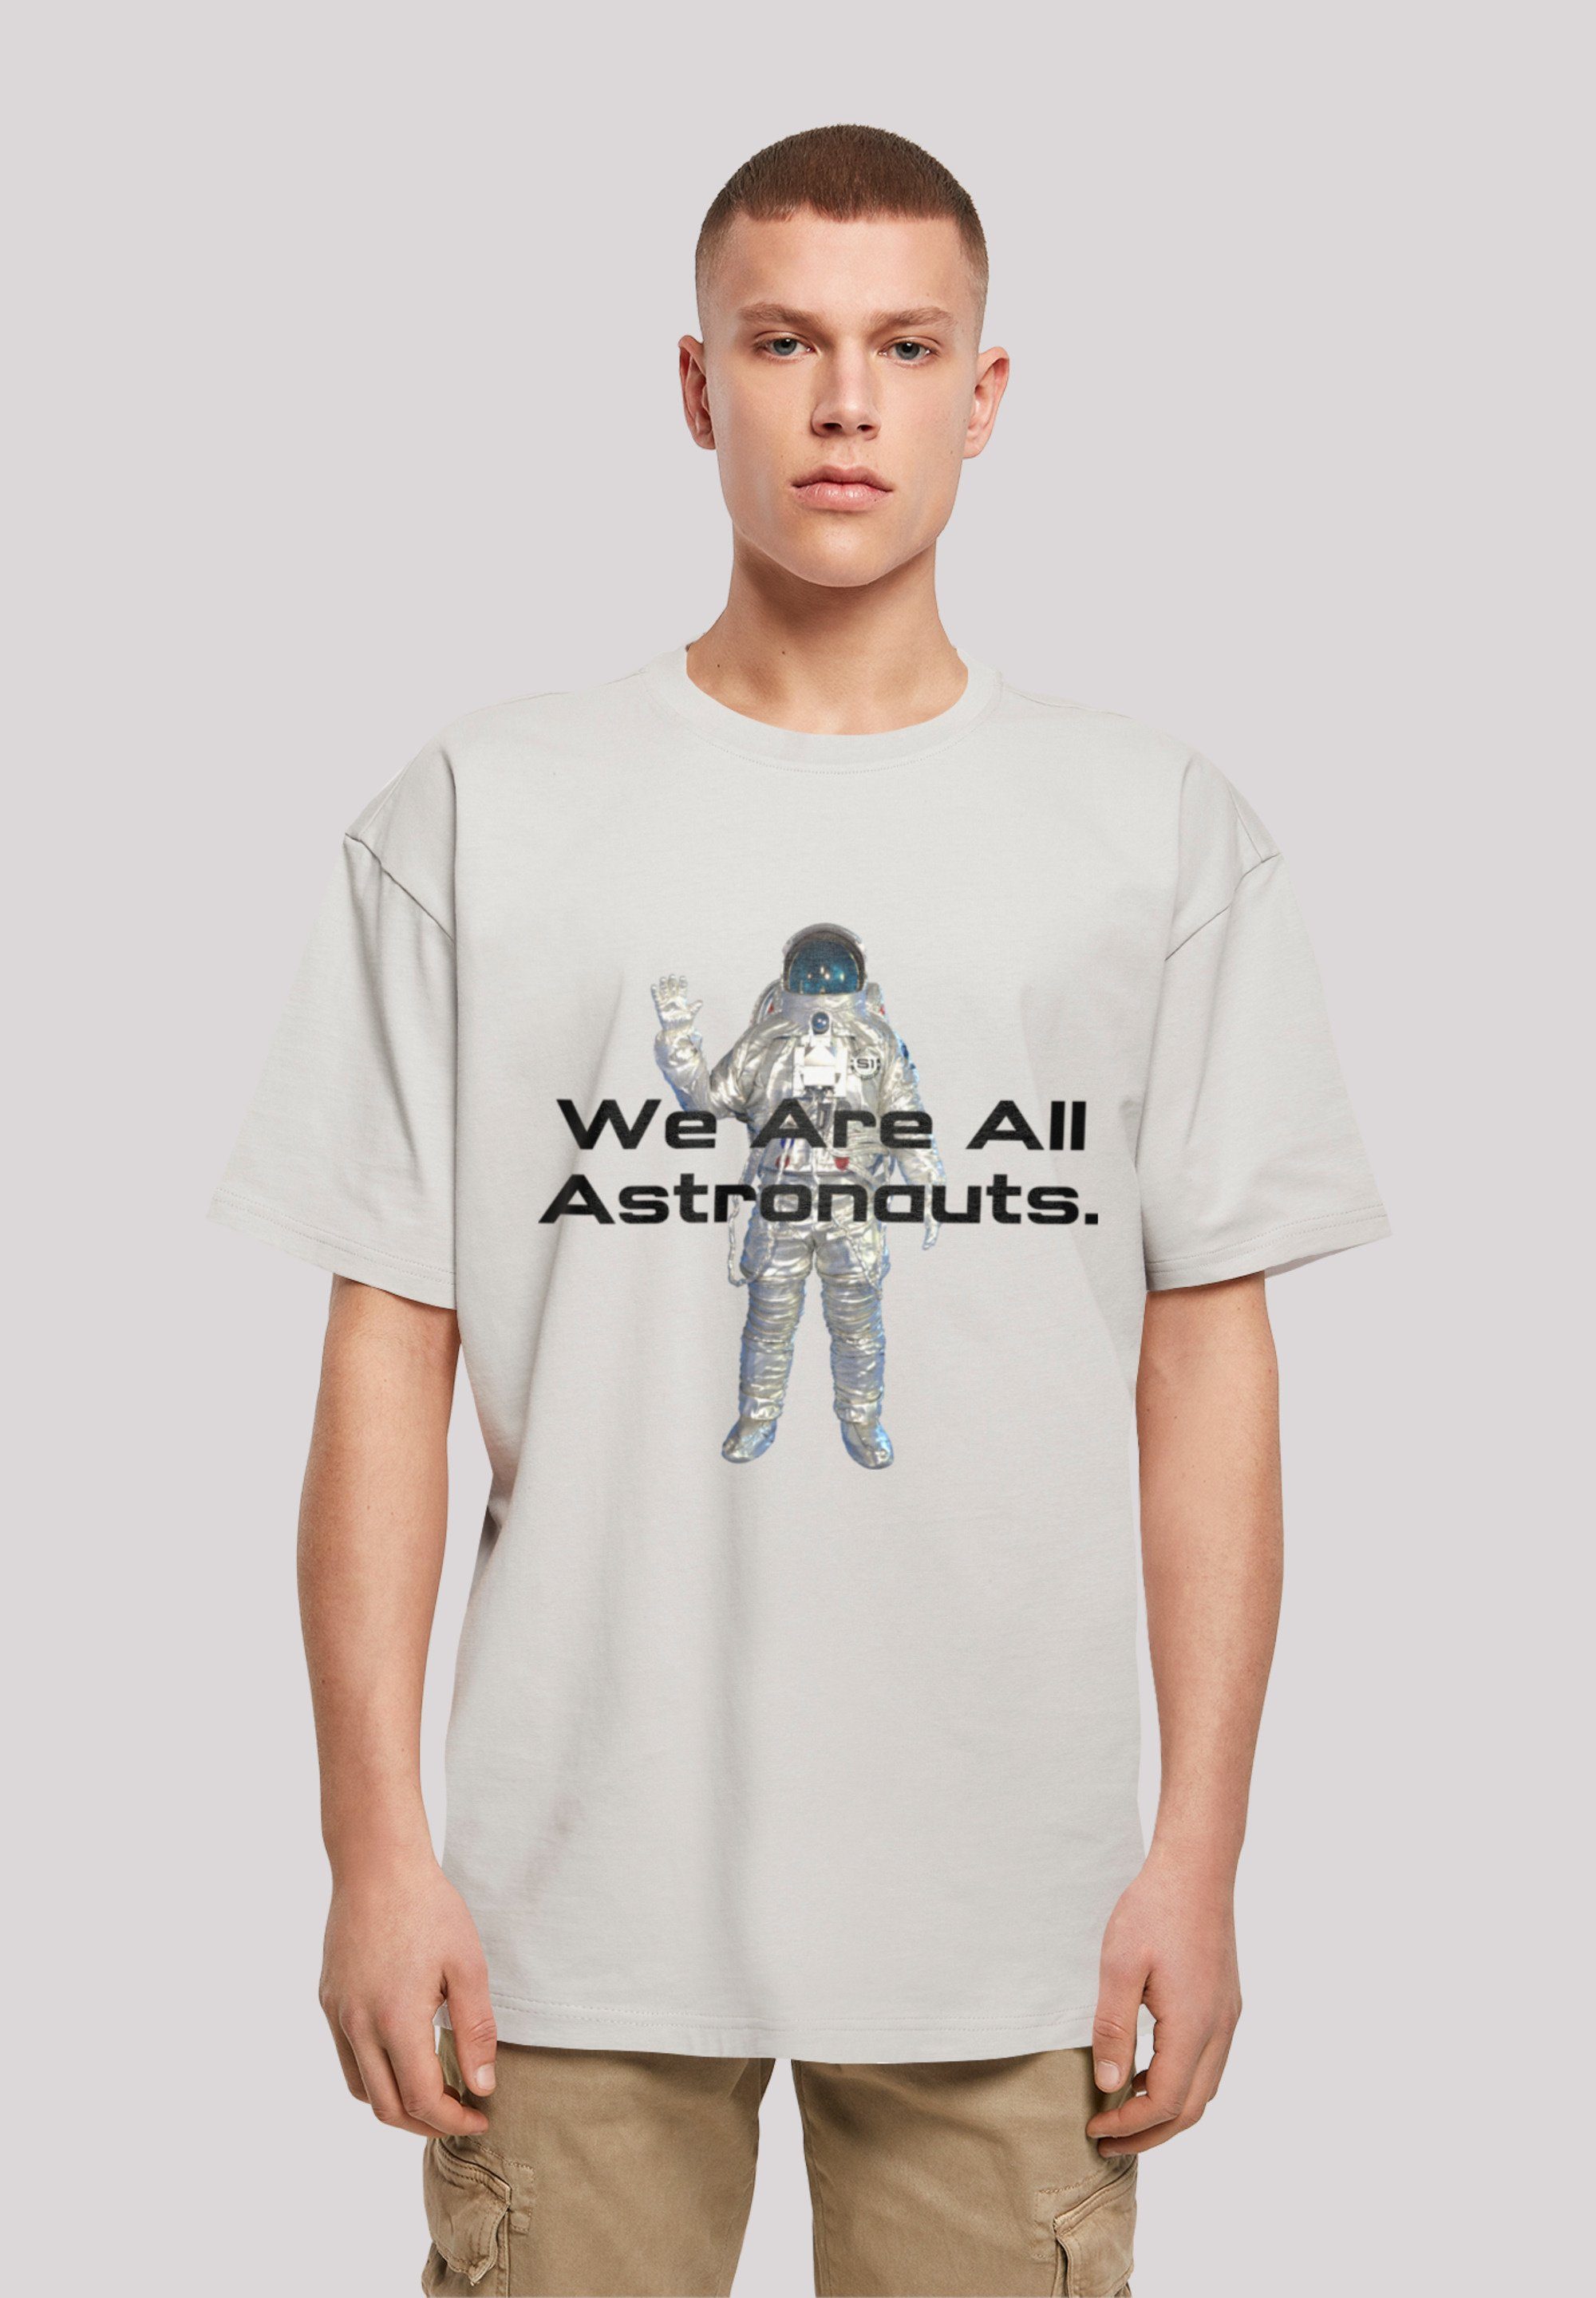 T-Shirt We astronauts SpaceOne F4NT4STIC PHIBER are Print all lightasphalt